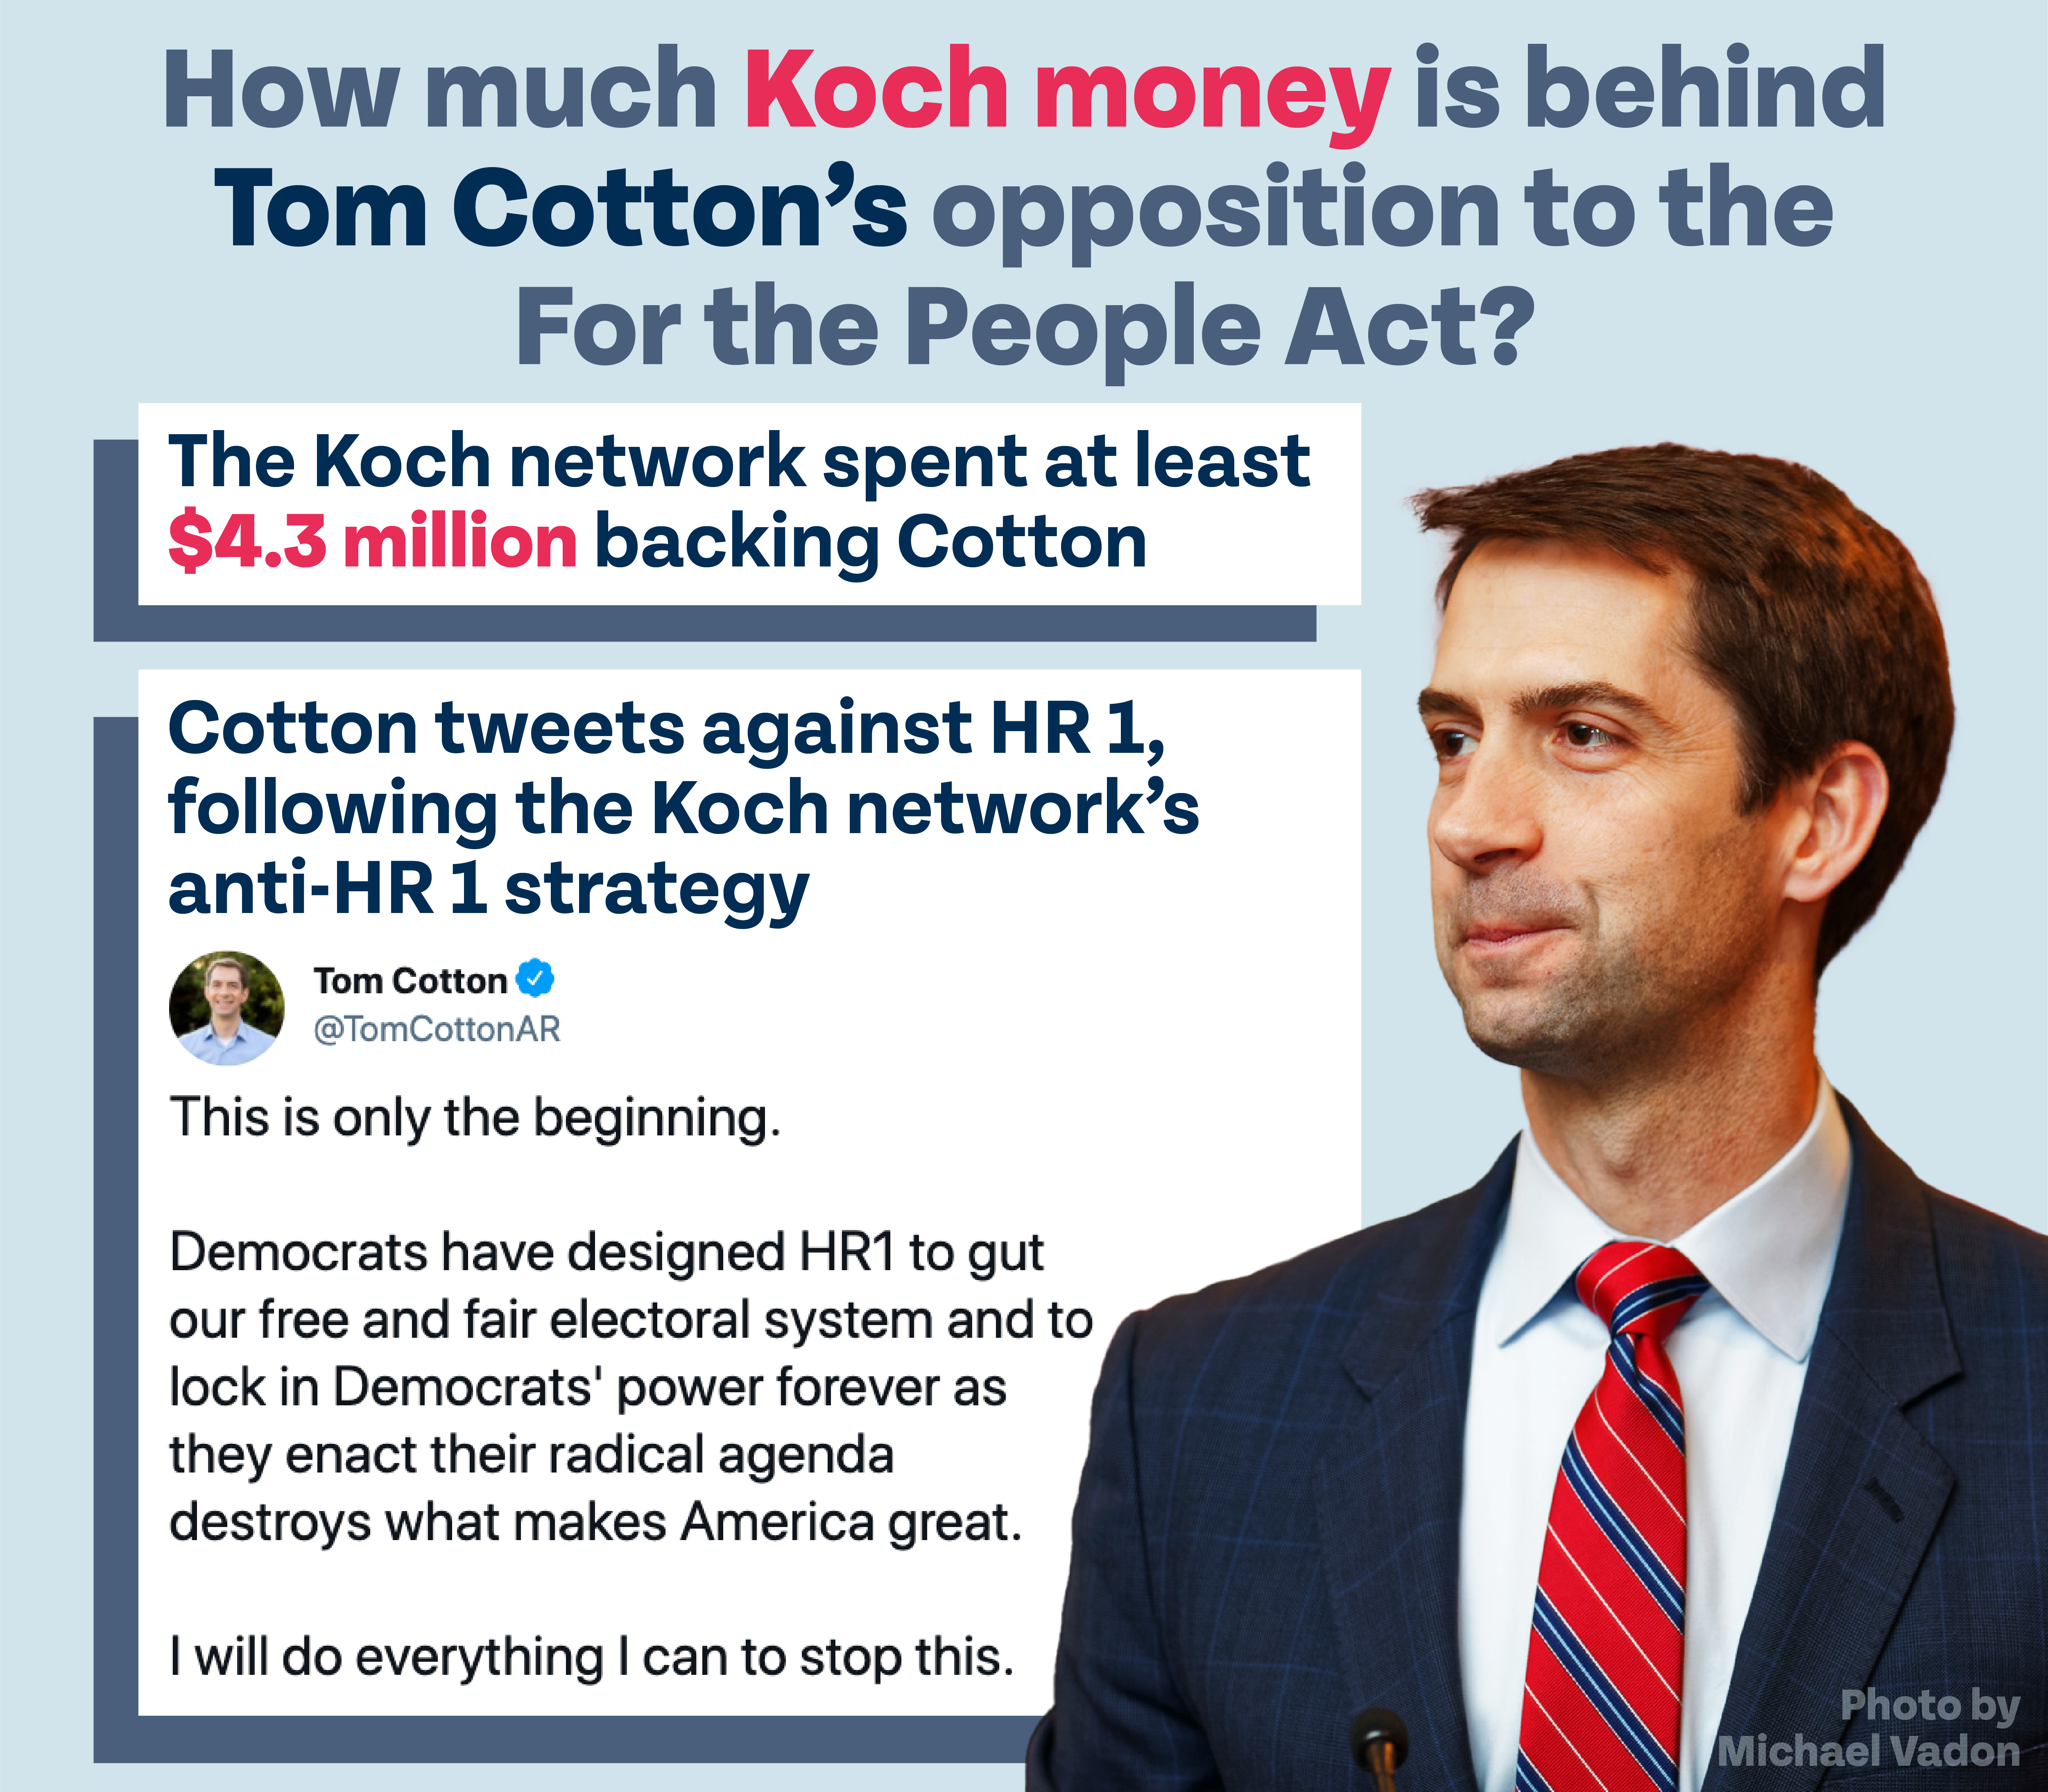 How much Koch money is behind Tom Cotton's opposition to the For the People Act? The Koch network spent at least $4.3 million backing Cotton. Cotton tweets against HR 1, following the Koch network’s anti-HR 1 strategy: @TomCottonAR: "This is only the beginning.Democrats have designed HR1 to gut our free and fair electoral system and to lock in Democrats' power forever as they enact their radical agenda destroys what makes America great. I will do everything I can to stop this."